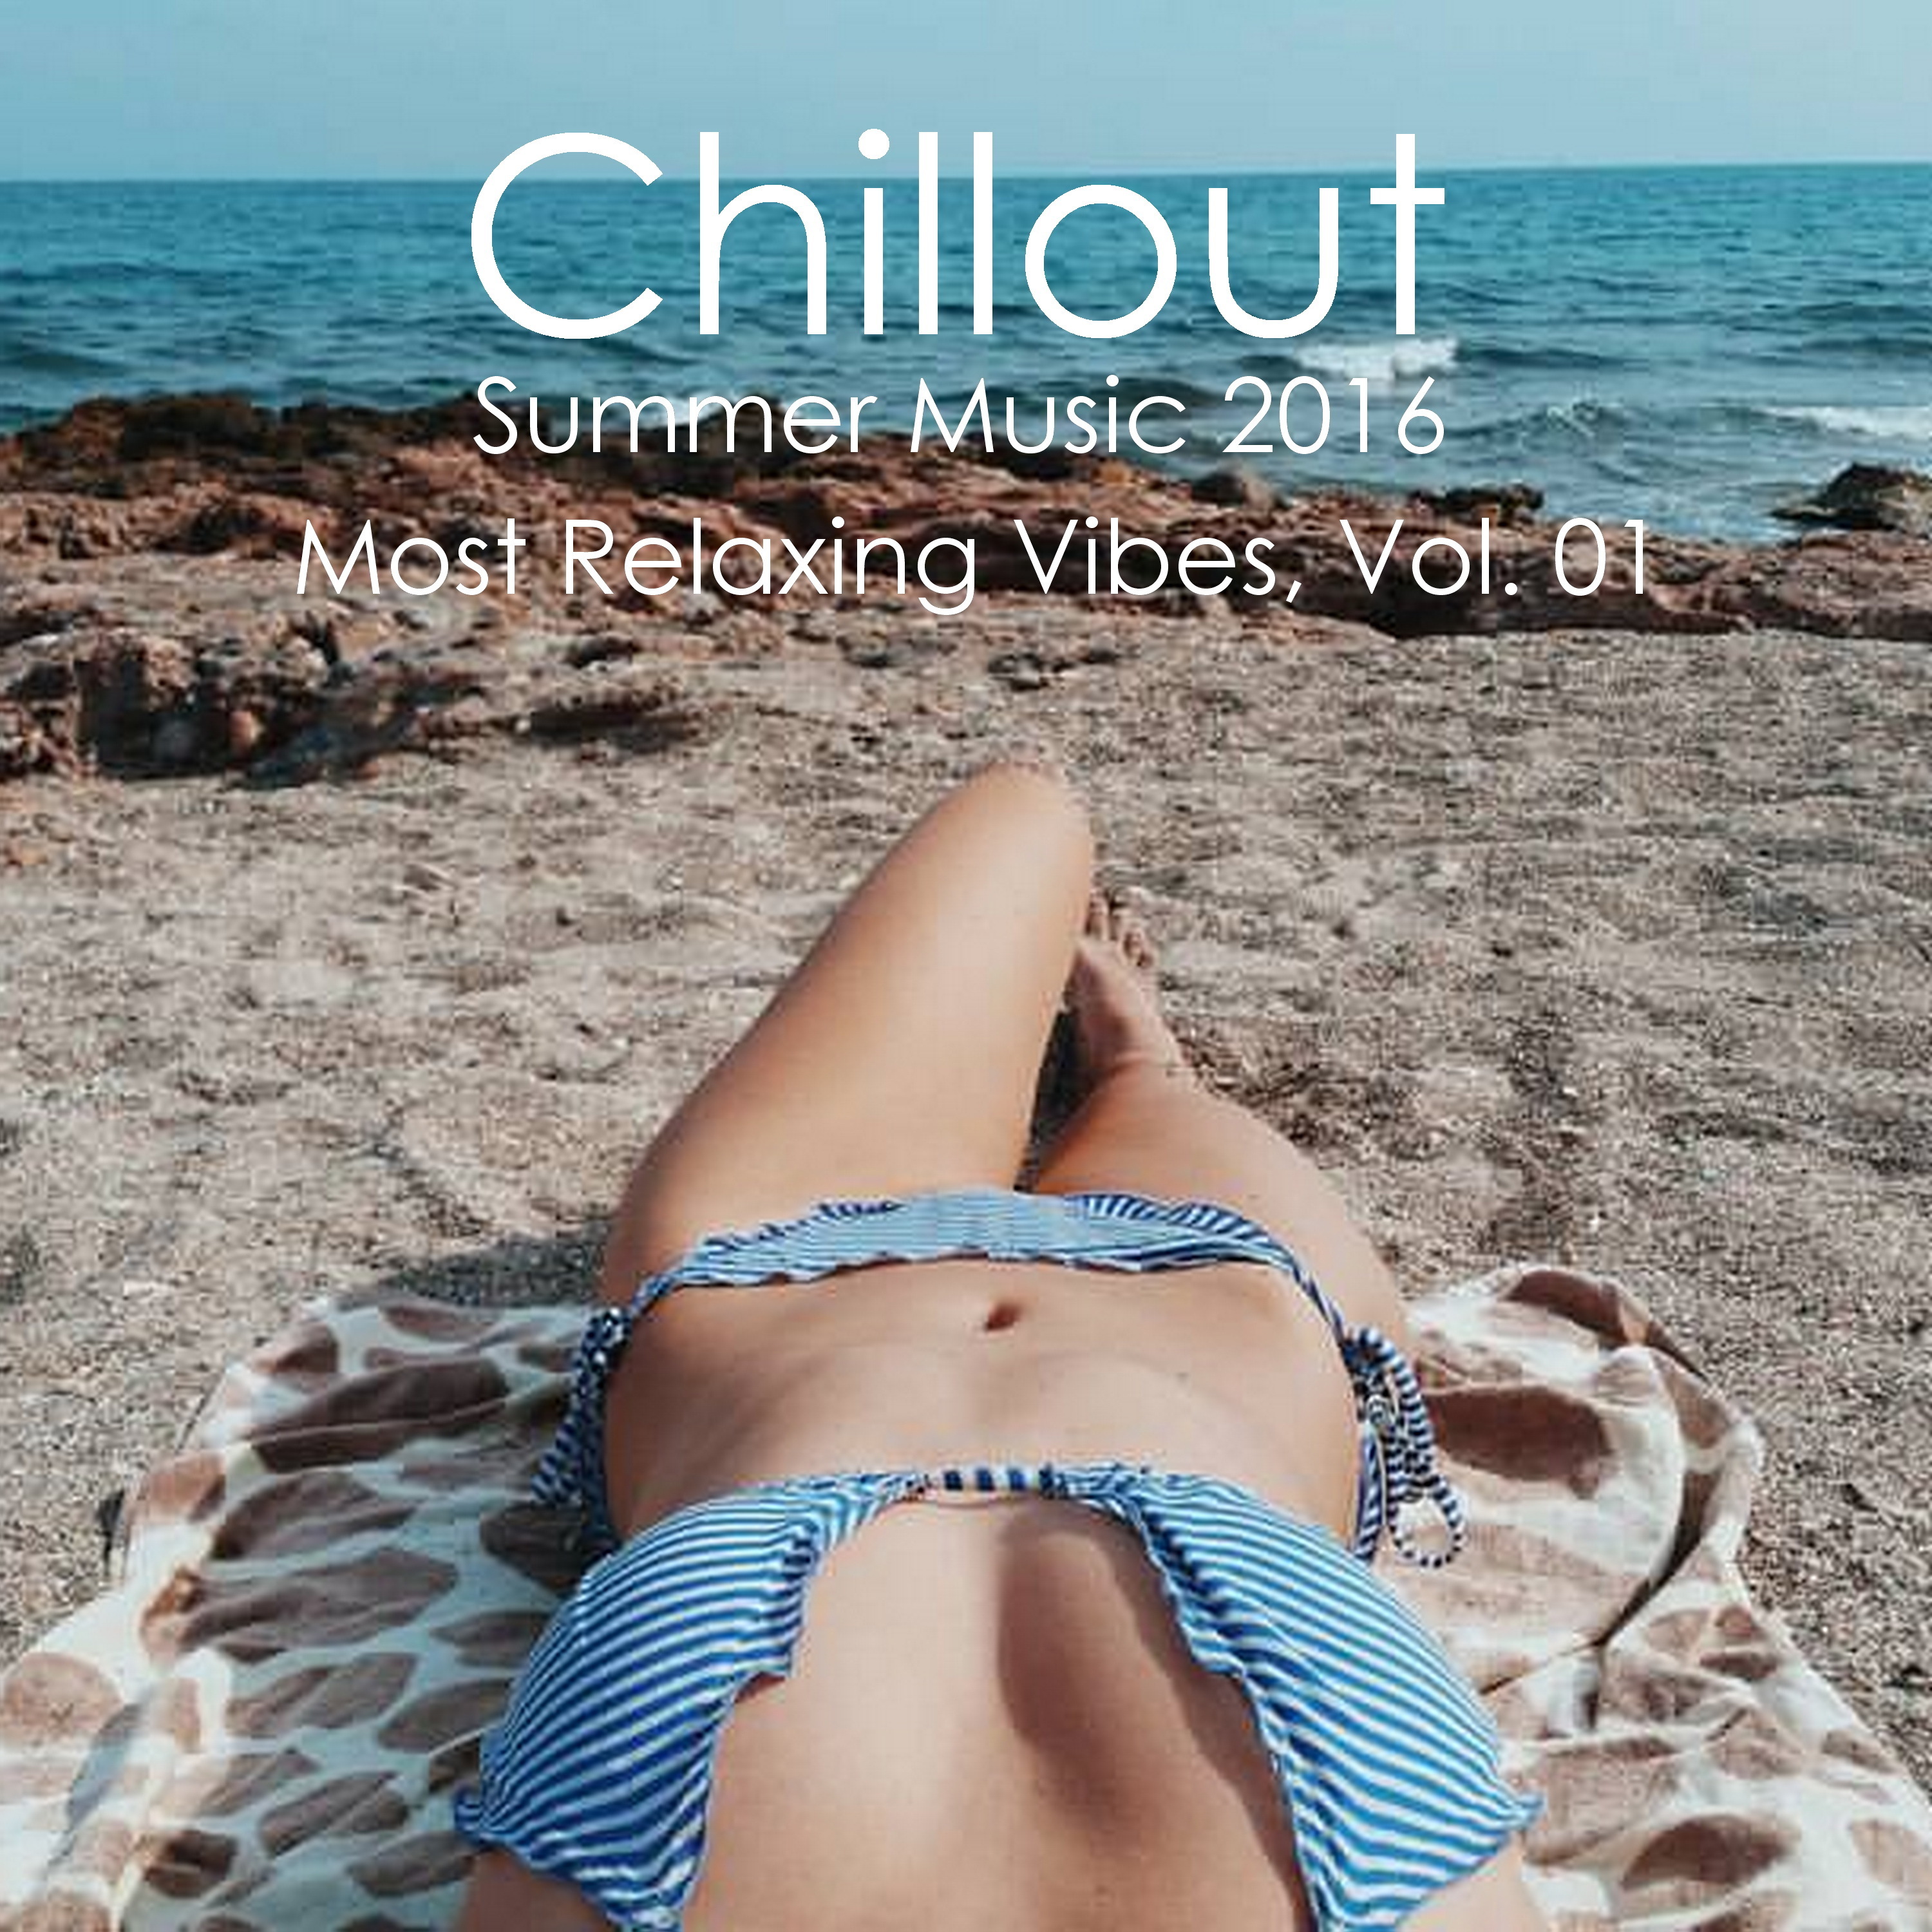 Chillout Summer Music 2016 - Most Relaxing Vibes, Vol. 01 (Mixed By Deep Dreamer) [Continuous DJ Mix]